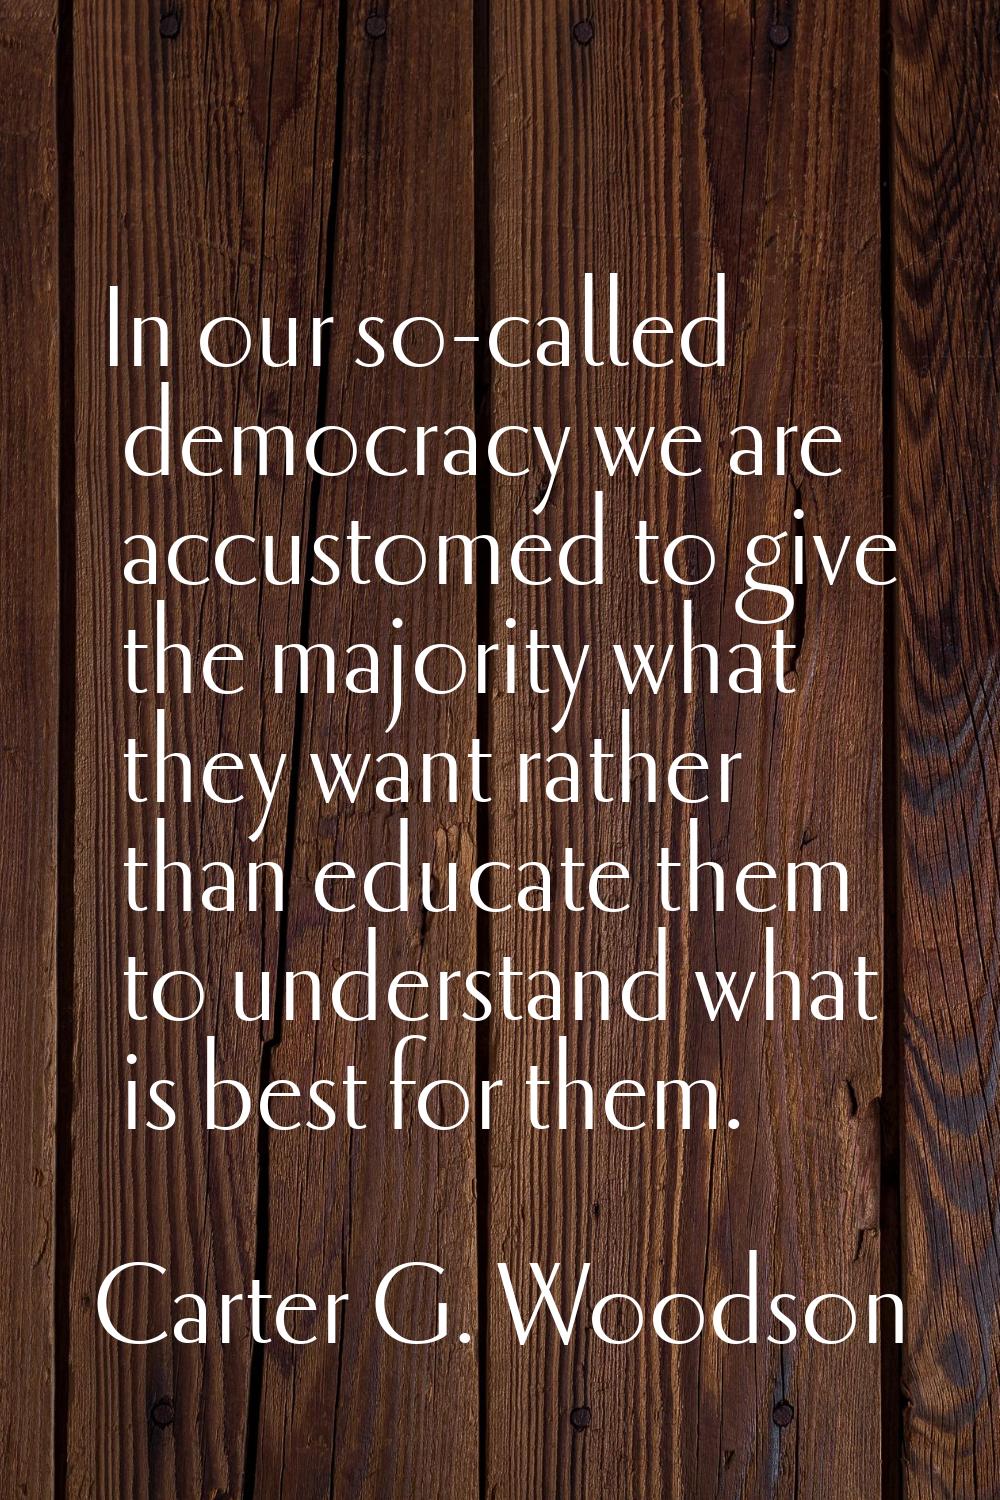 In our so-called democracy we are accustomed to give the majority what they want rather than educat